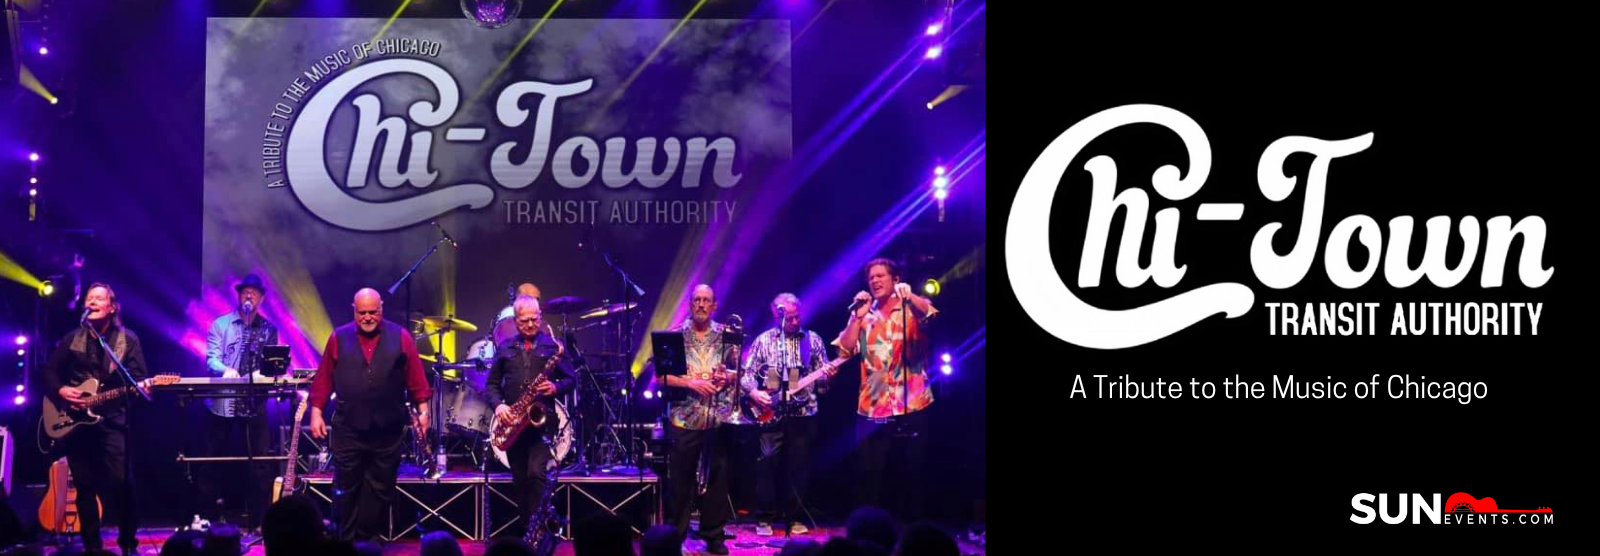 Chi Town Transit Authority Band Image